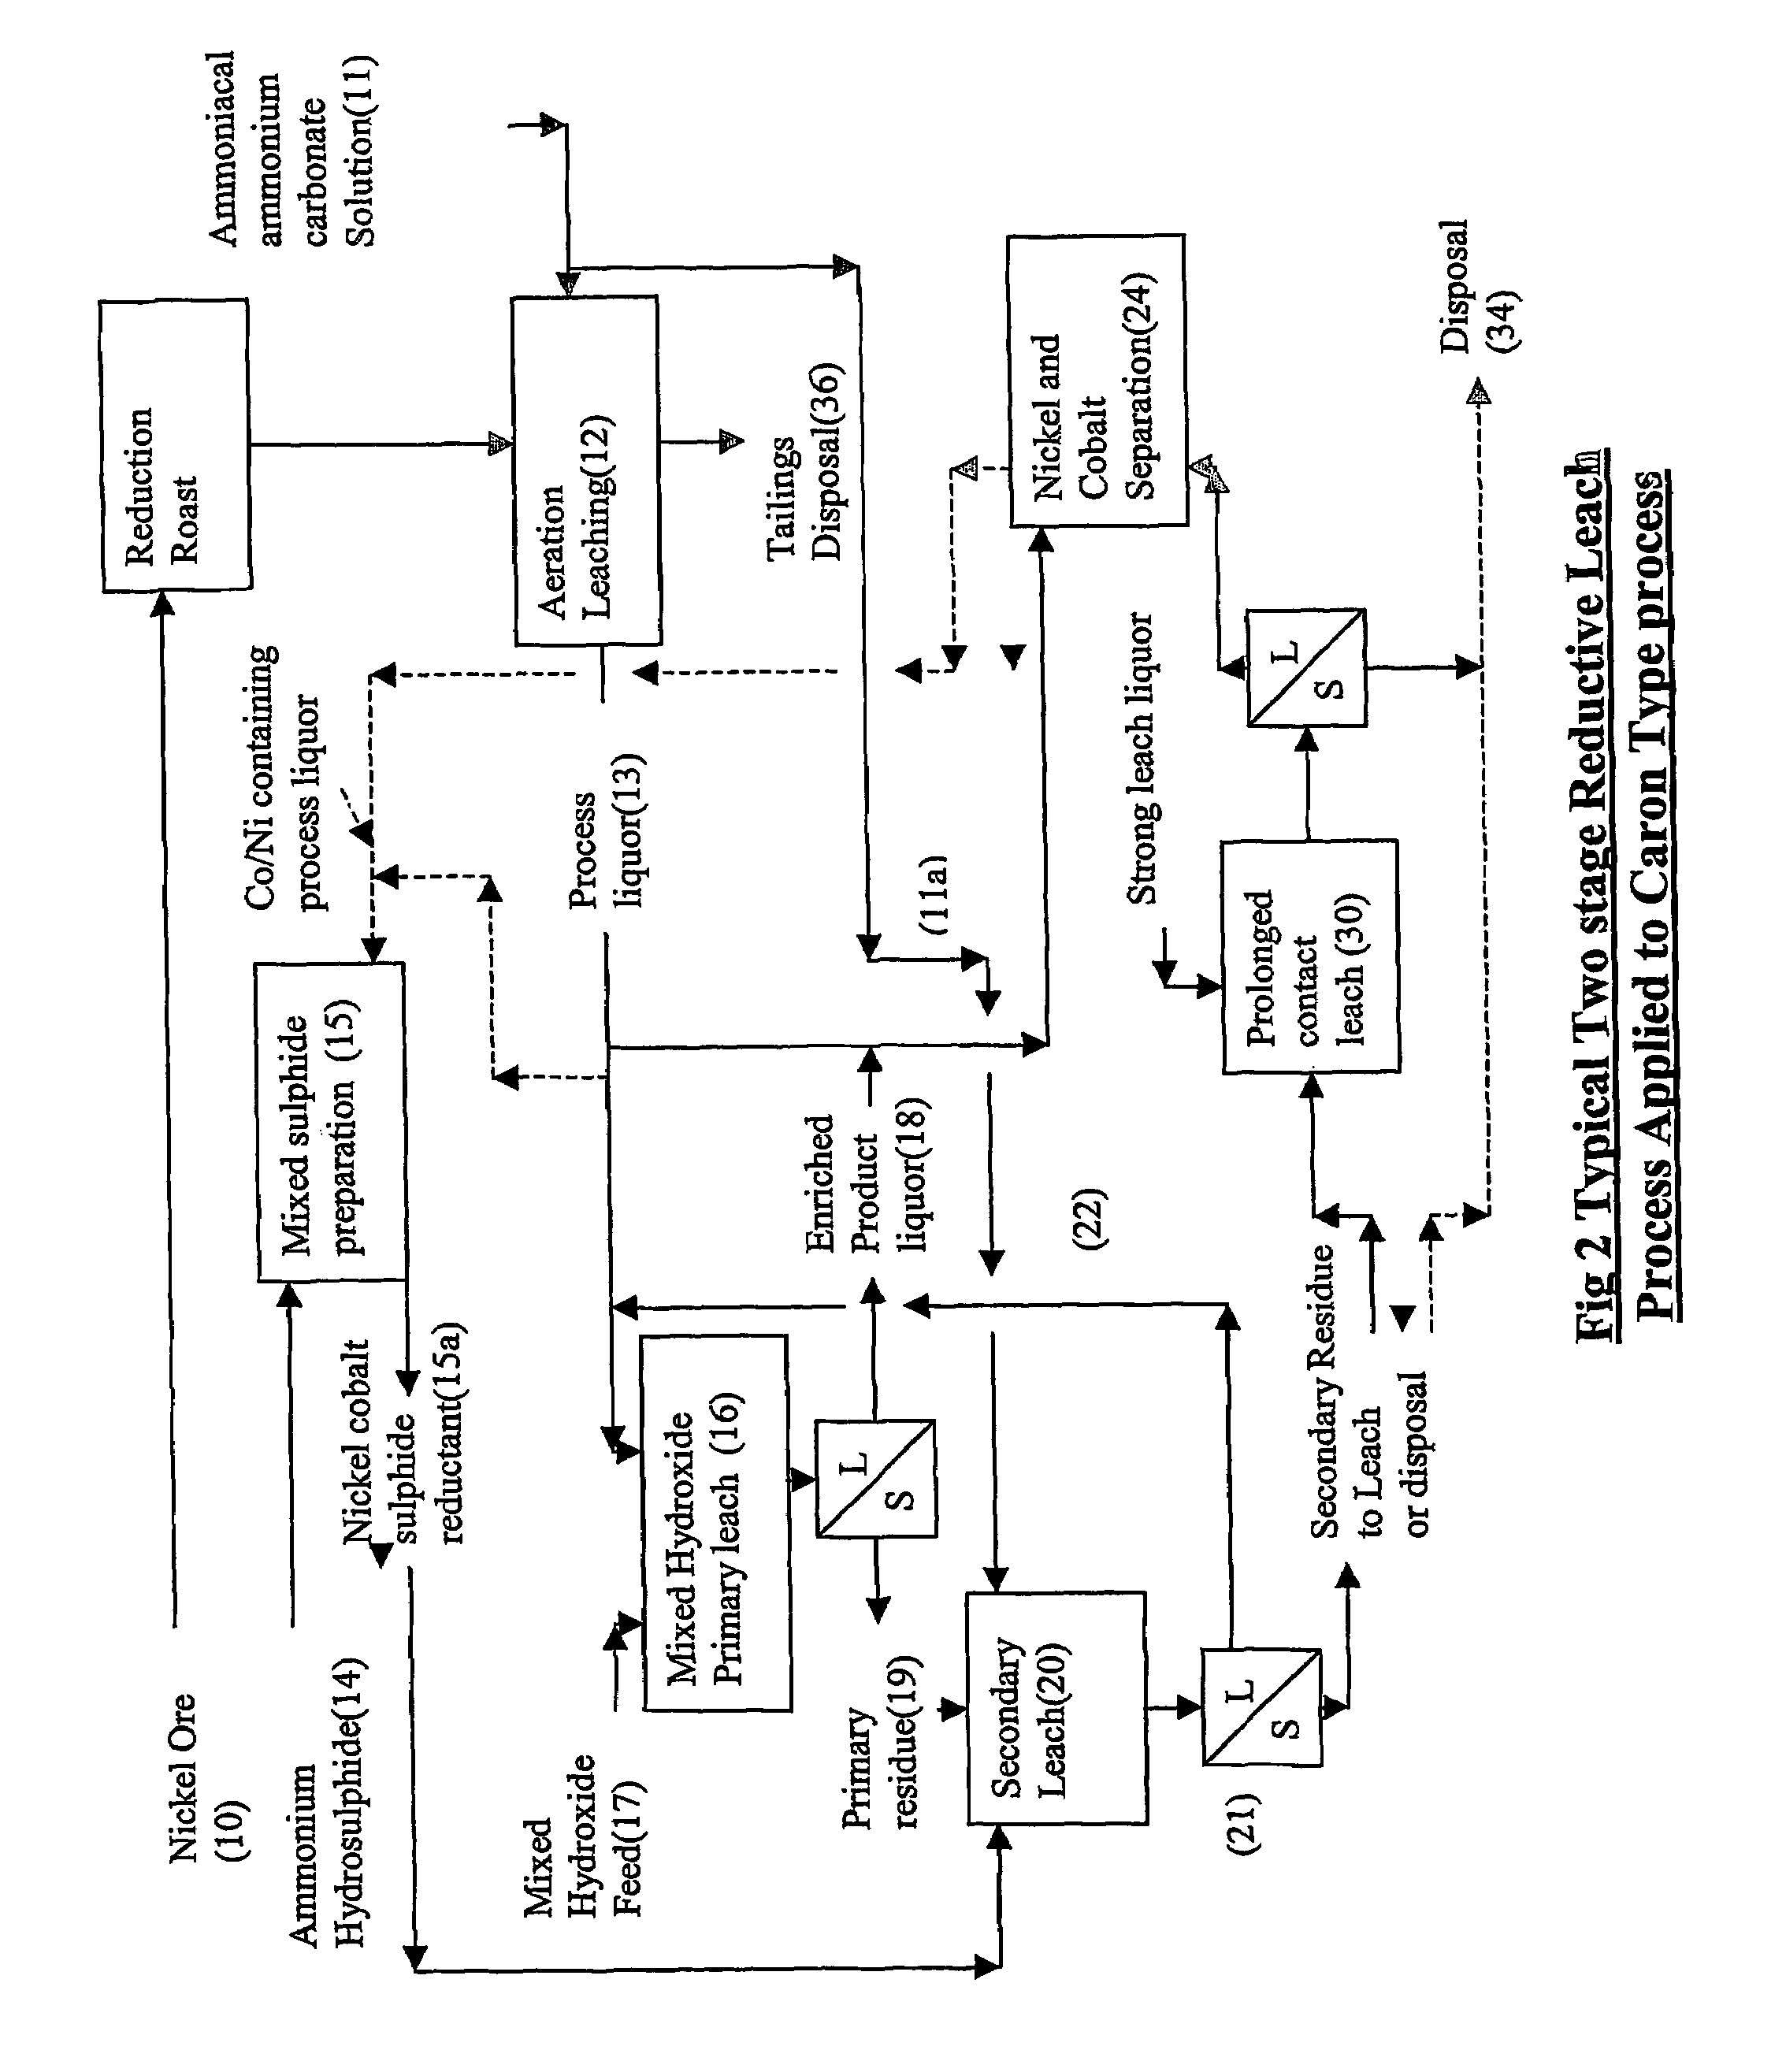 Reductive ammoniacal leaching of nickel and cobalt bearing materials